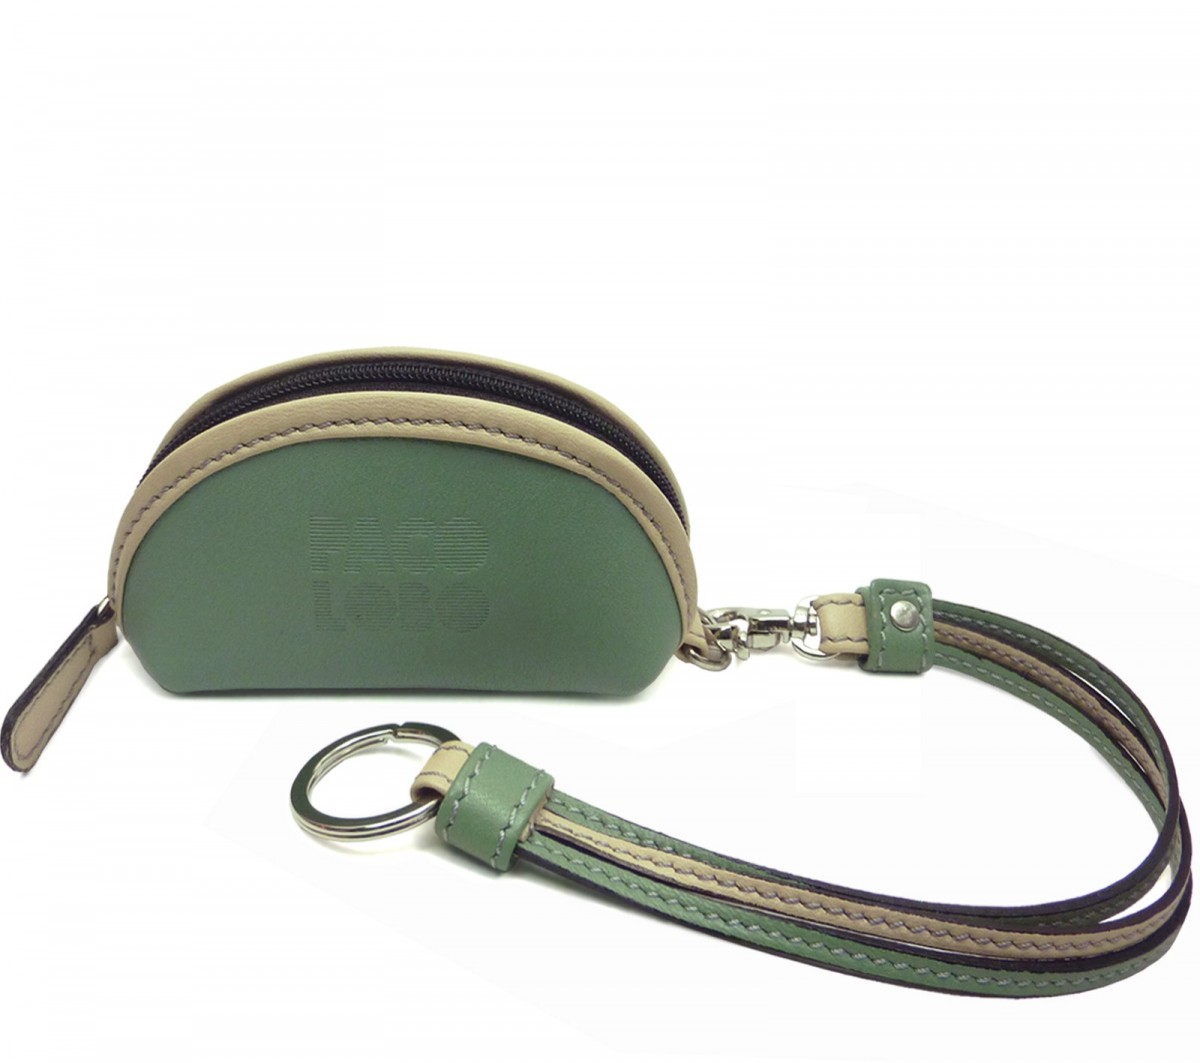 Purse with straps keyring